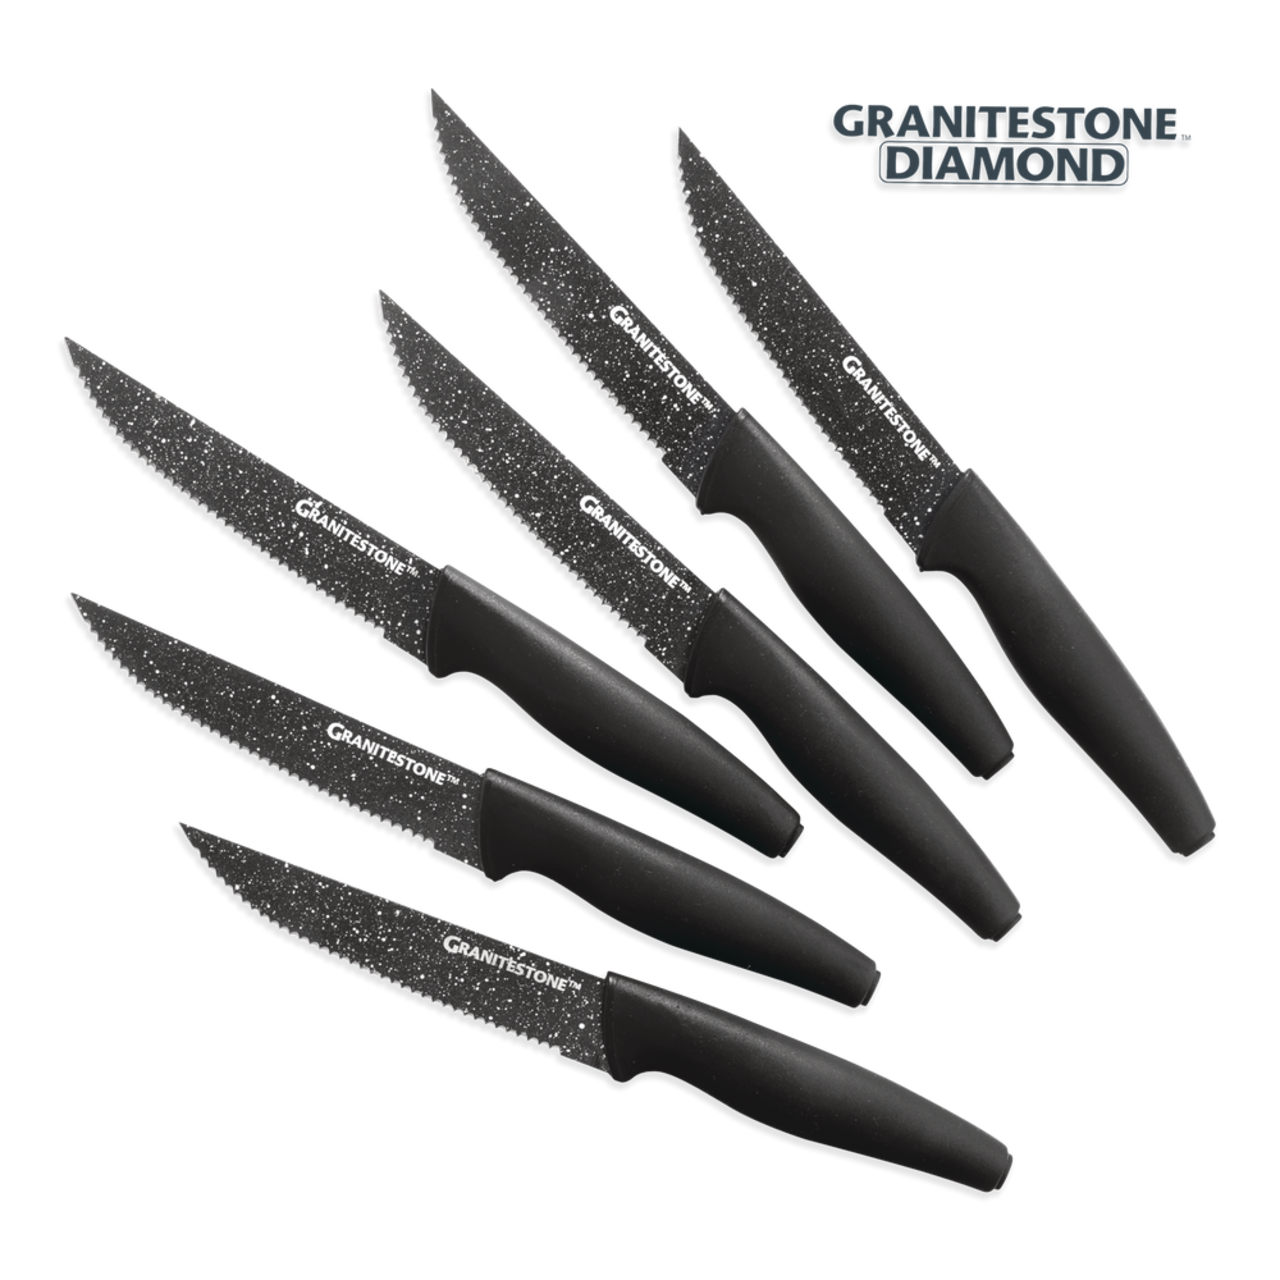 https://media-www.canadiantire.ca/product/living/as-seen-on-tv/asotv/3998750/tv-granitestone-nutriblade-6-pc-steak-knives-ca887b1f-73b5-4598-a098-60d9c61d269e.png?imdensity=1&imwidth=640&impolicy=mZoom